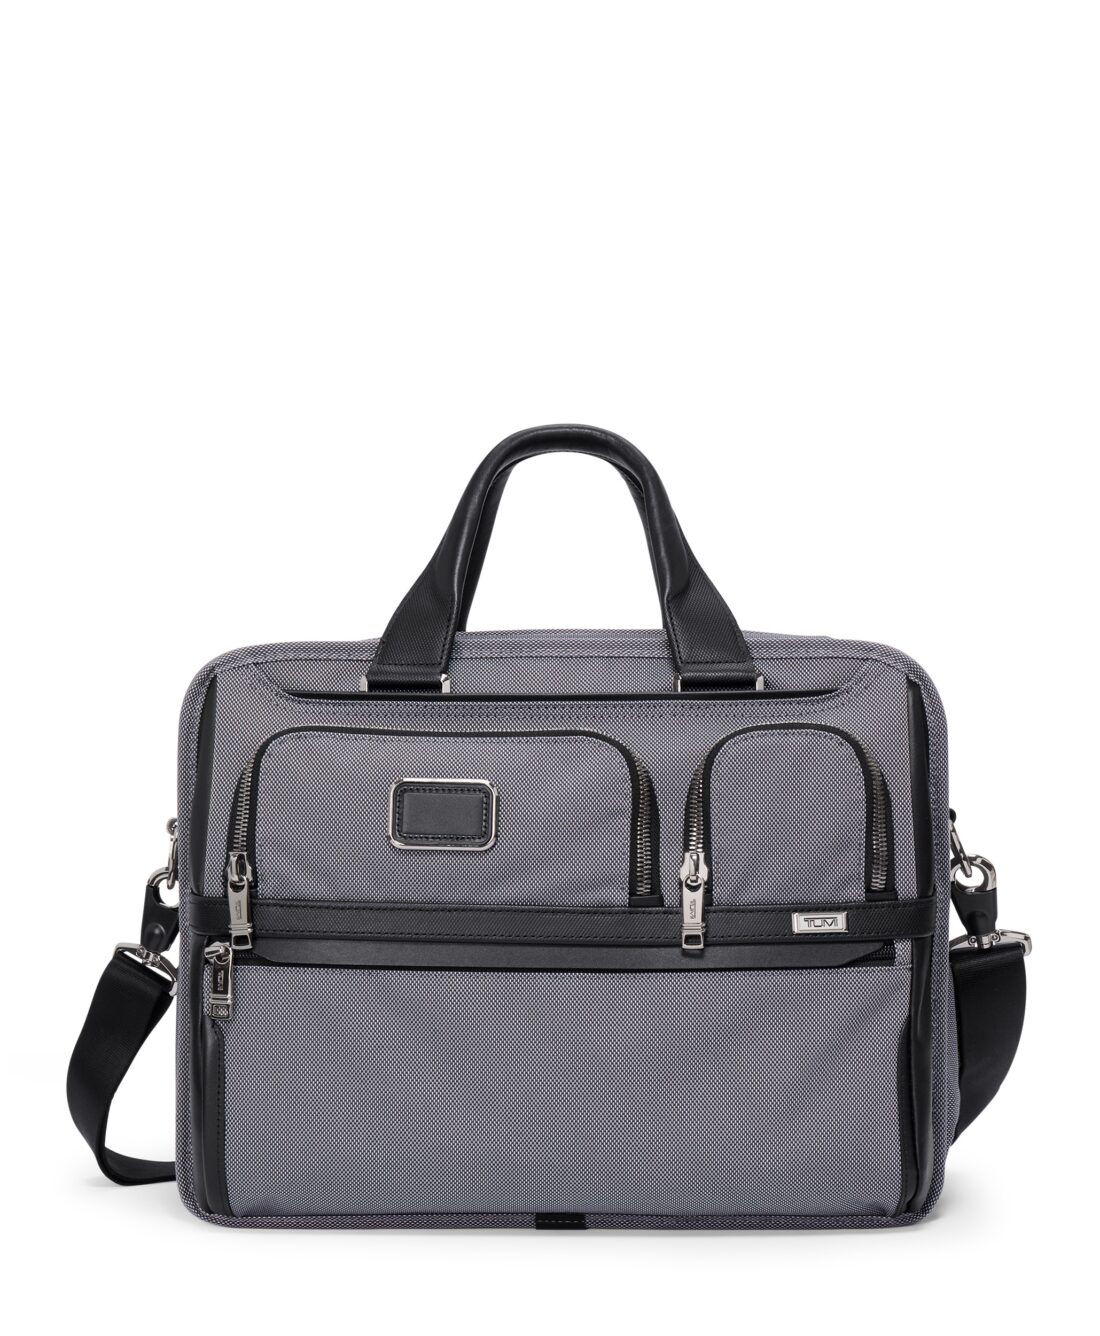 Alpha X Expandable Organizer Laptop Brief in Meteor Grey.